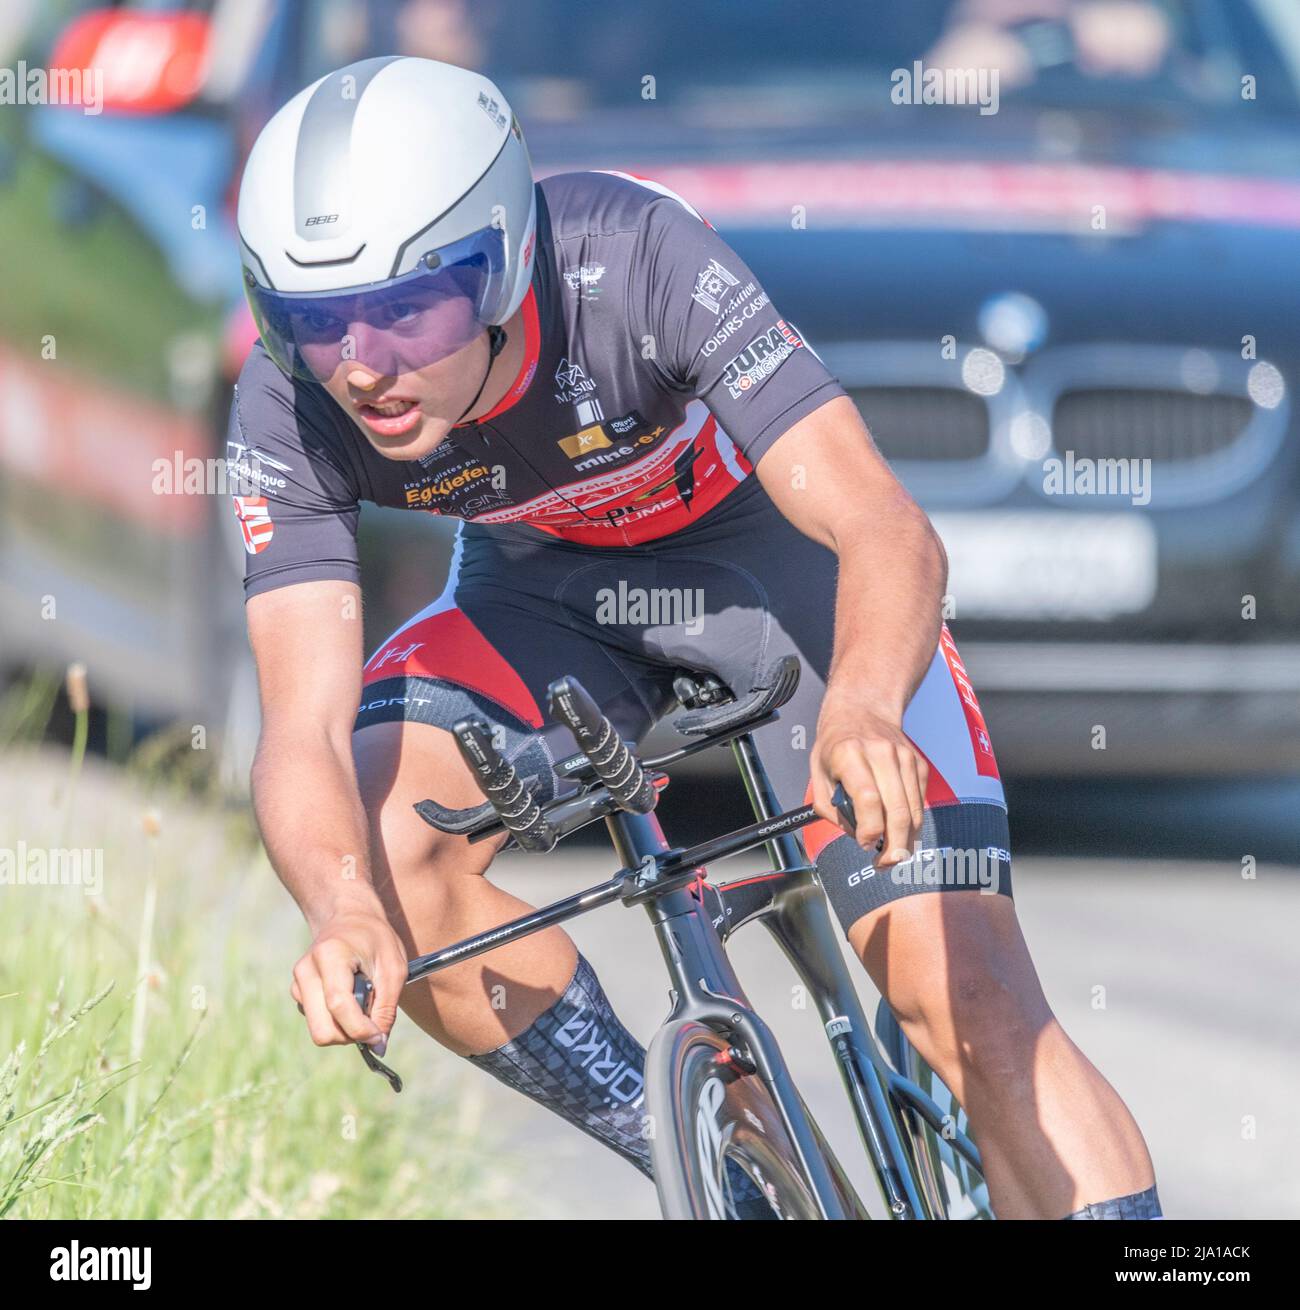 Puidoux Switzerland. 26th May, 2022: Victor Benareau of France is in action during Prologue of the M19 2022 'Tour du Pays de Vaud'. Prologue of the U19 cycling 'Tour du Pays de Vaud' took place in the village of Puidoux and in the heart of Lavaux. Credit Eric Dubost/Alamy Live News. Stock Photo